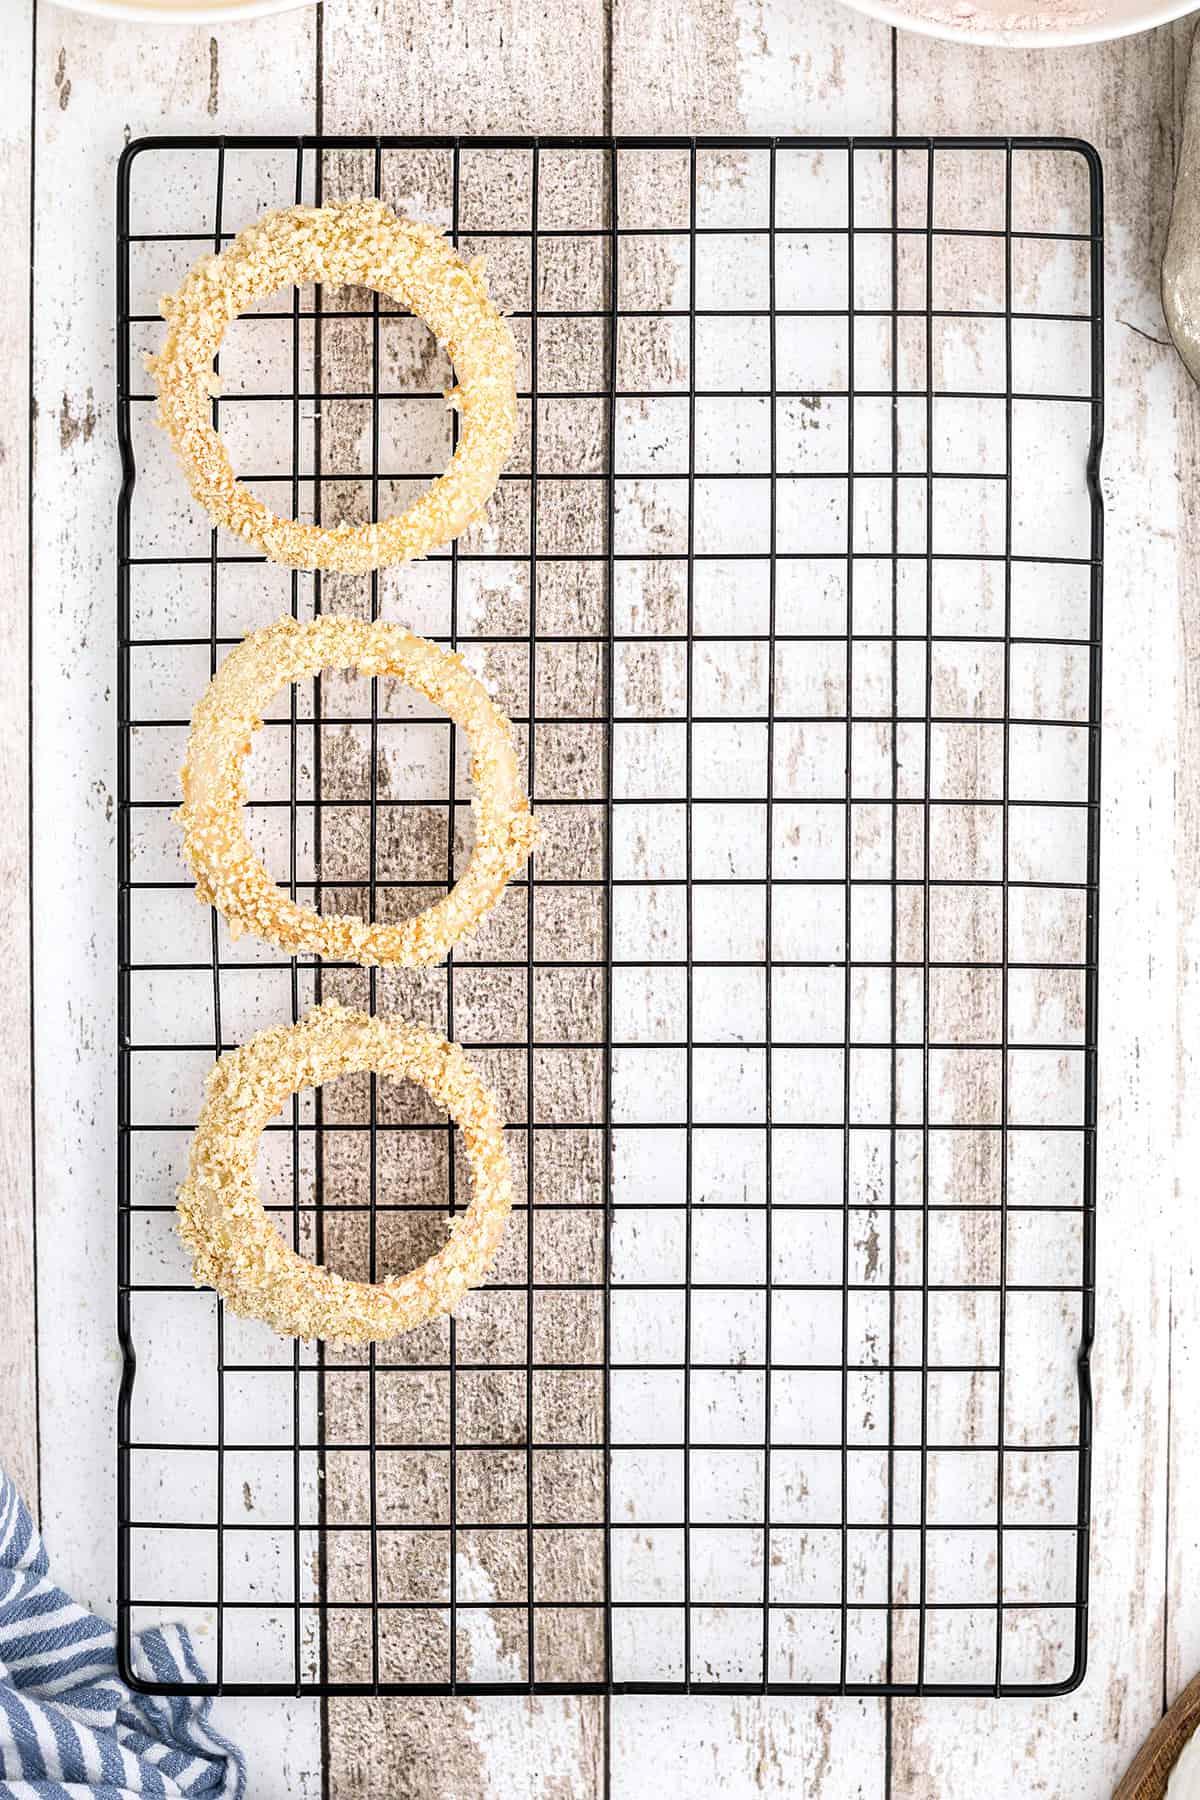 Prepped onion rings on a wire rack.